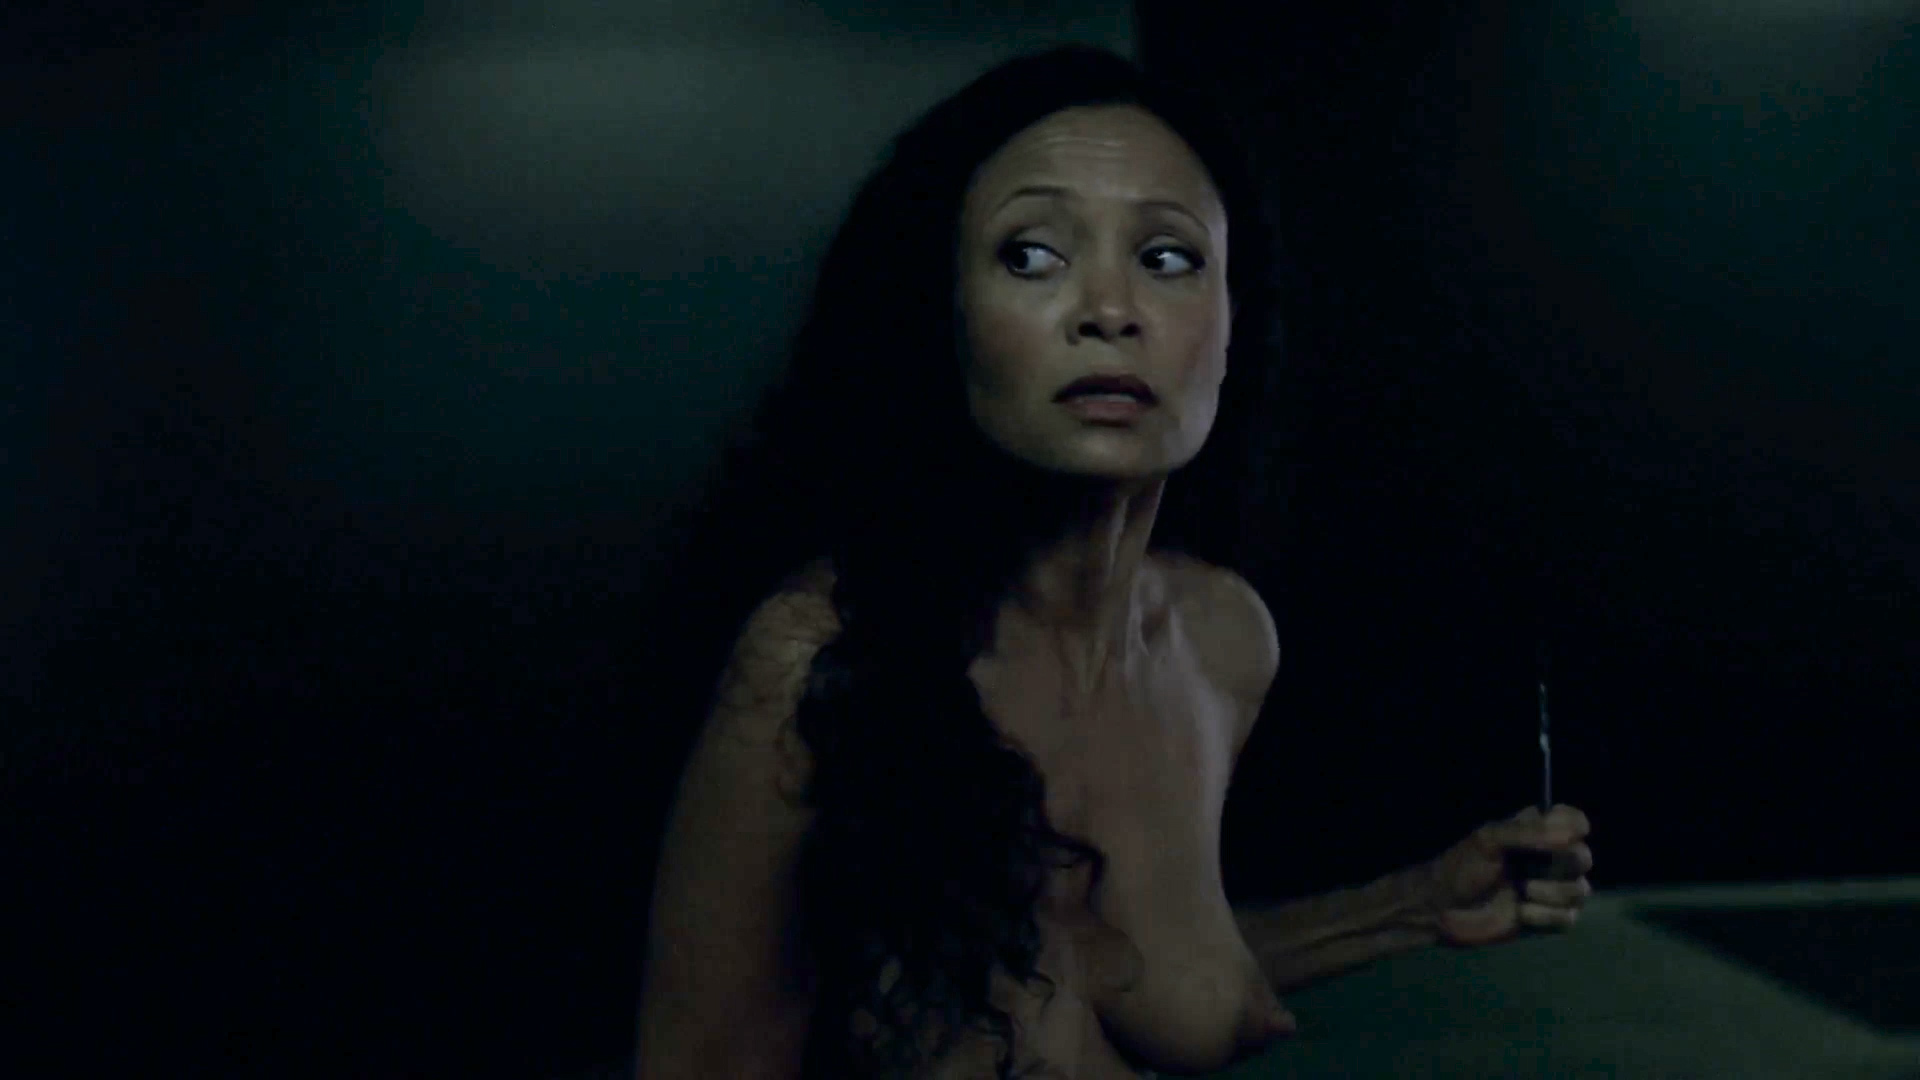 Thandie Newton - Westworld Star Naked, Young Topless Ebony Girl - Besieged.